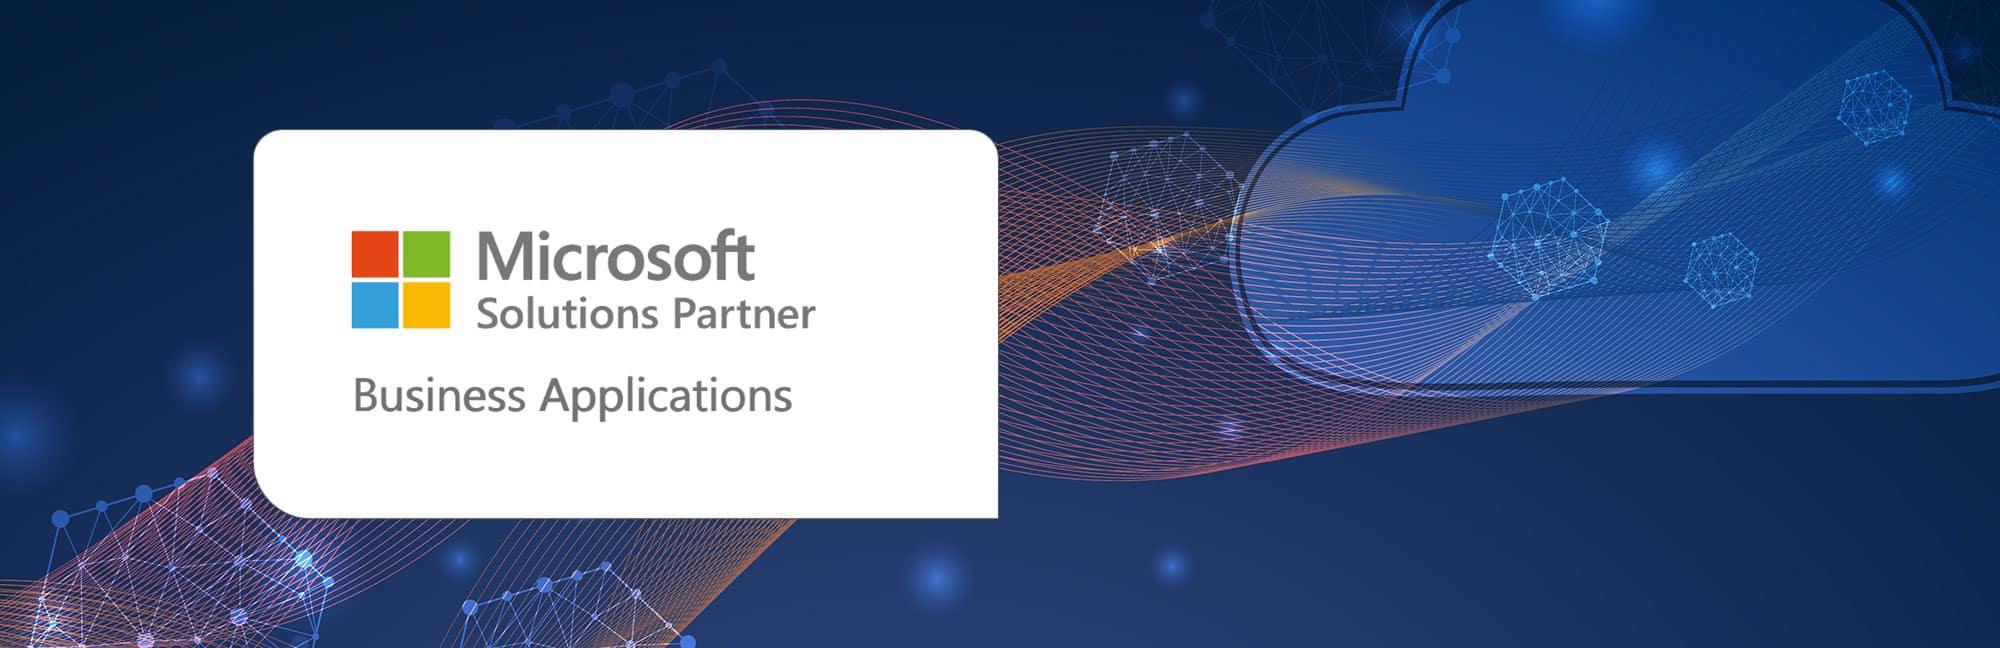 GMI group is nu Microsoft Solutions Partner for Business Applications